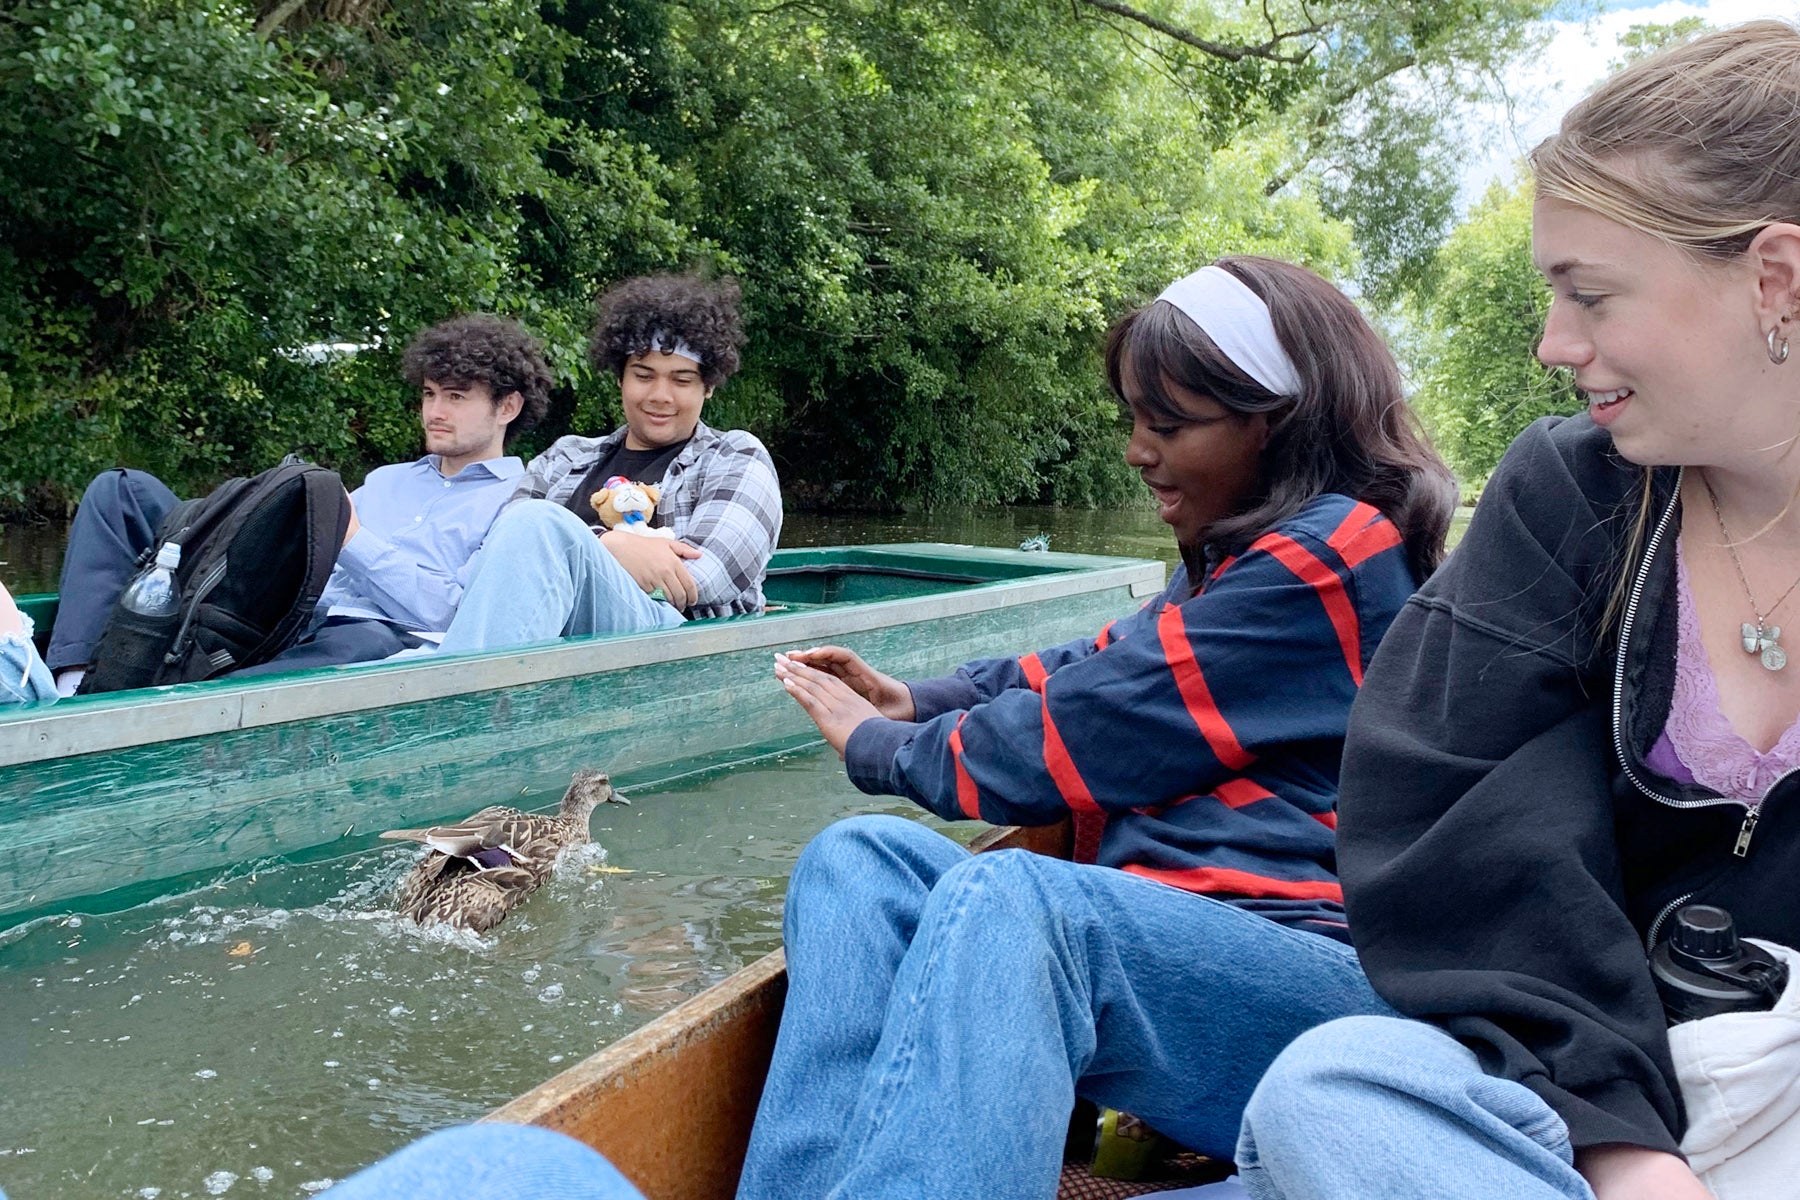 PathwayOregon scholars in boats on the river near Oxford